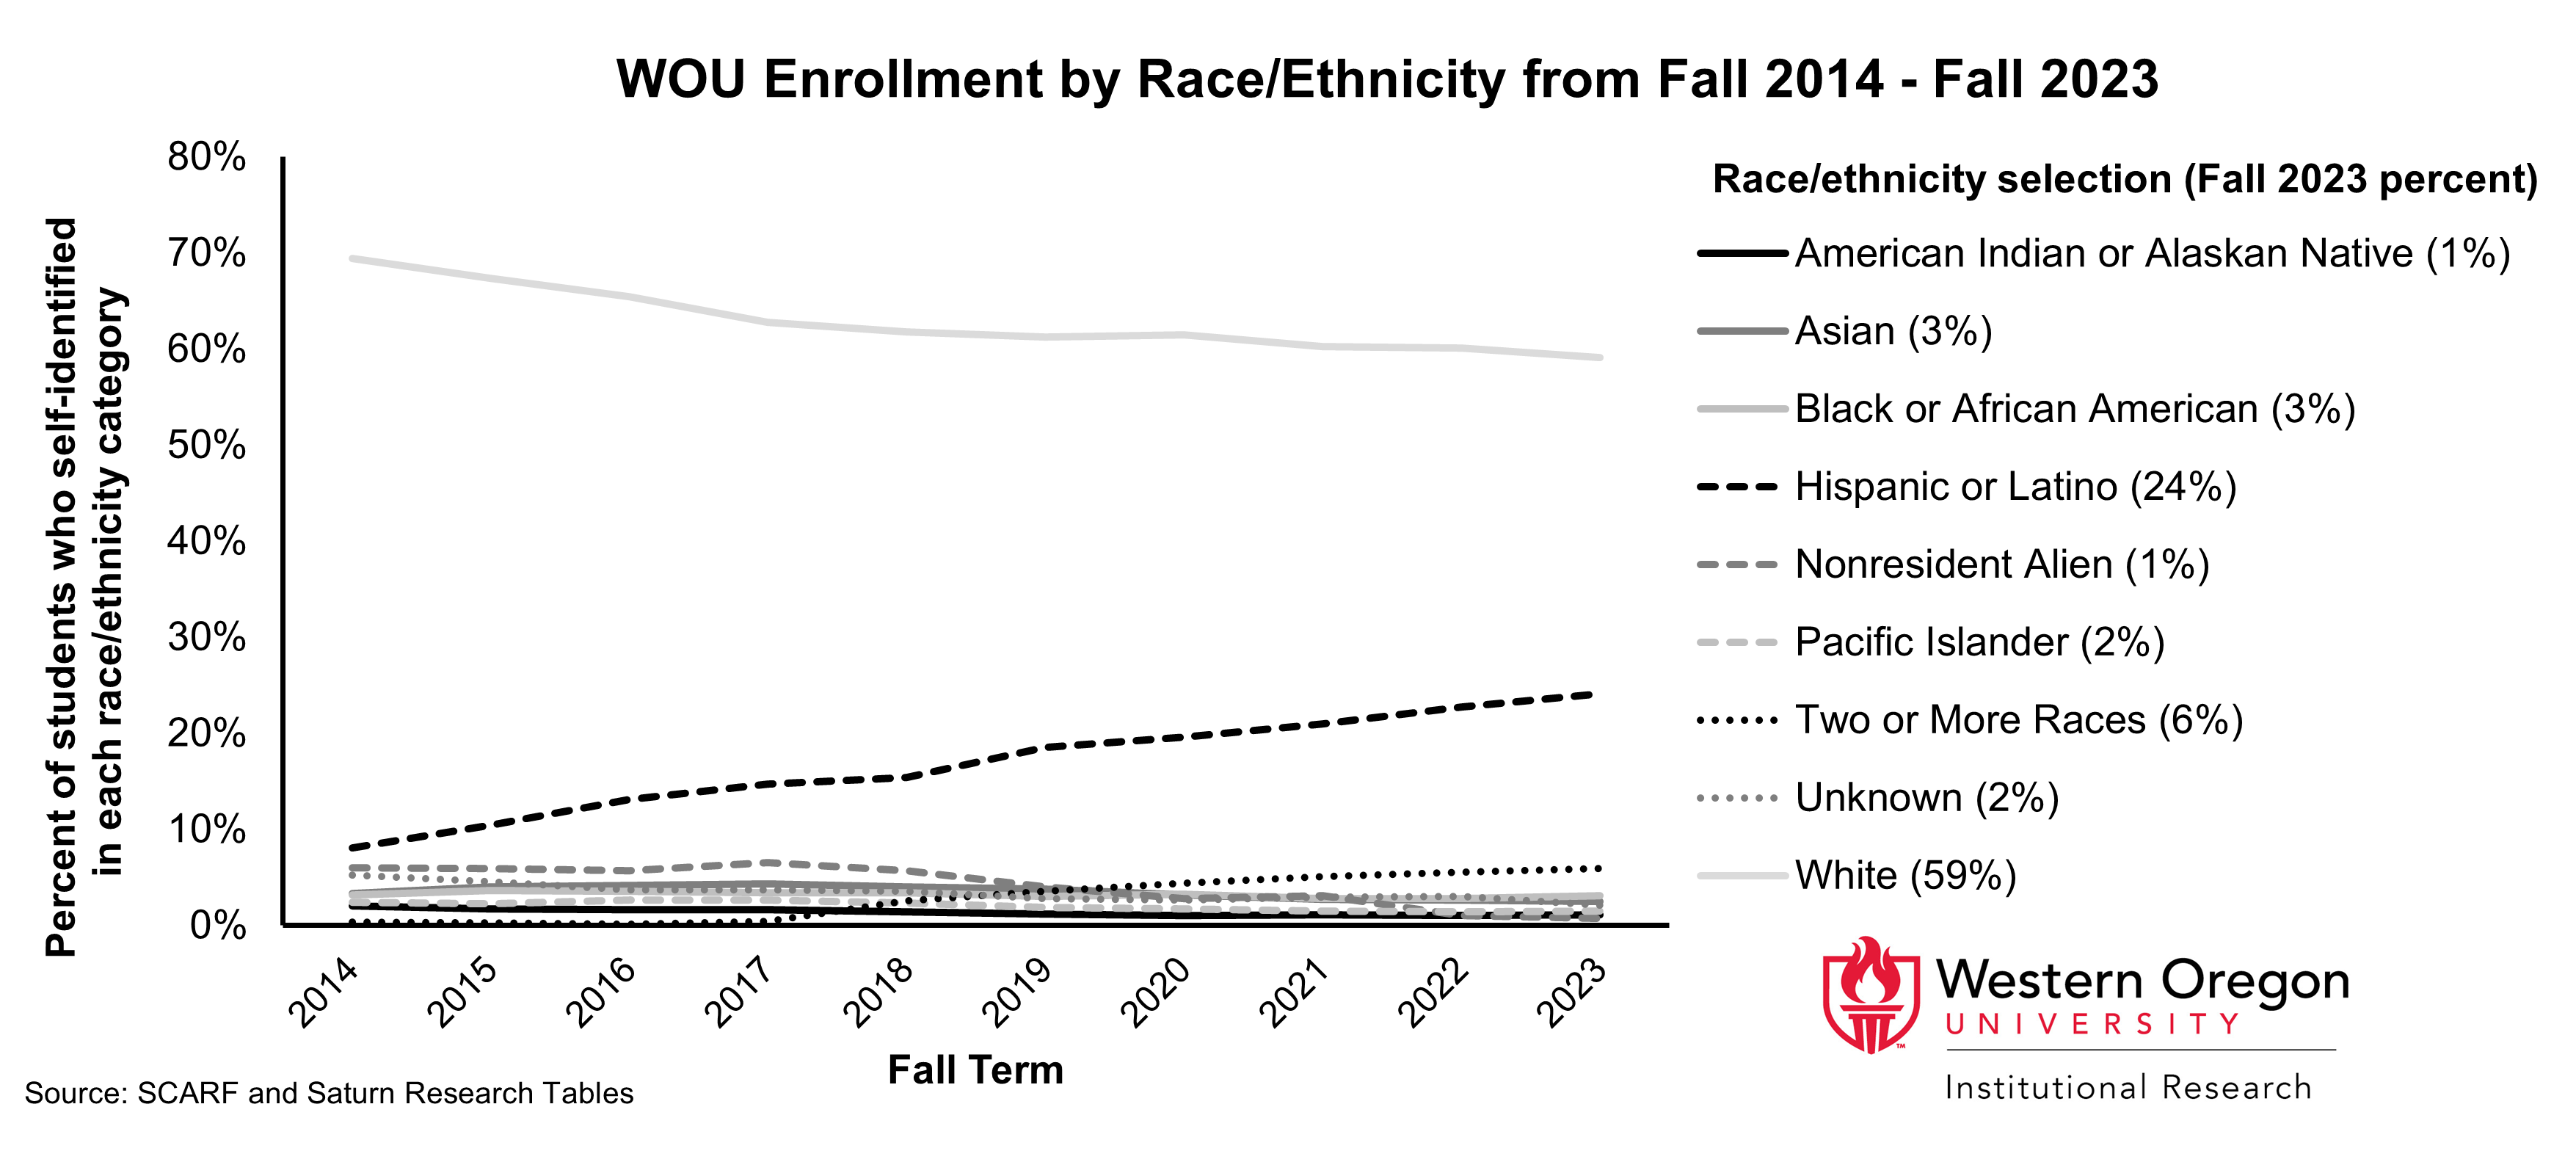 Line graph of enrollment percentages since 2014 for a variety of WOU self-identified race/ethnicity categories, showing that enrollment for White students has been declining, while enrollment for Hispanic or Latinx students has been increasing. Enrollment for students in other race/ethnicity categories has remained largely stable over time.